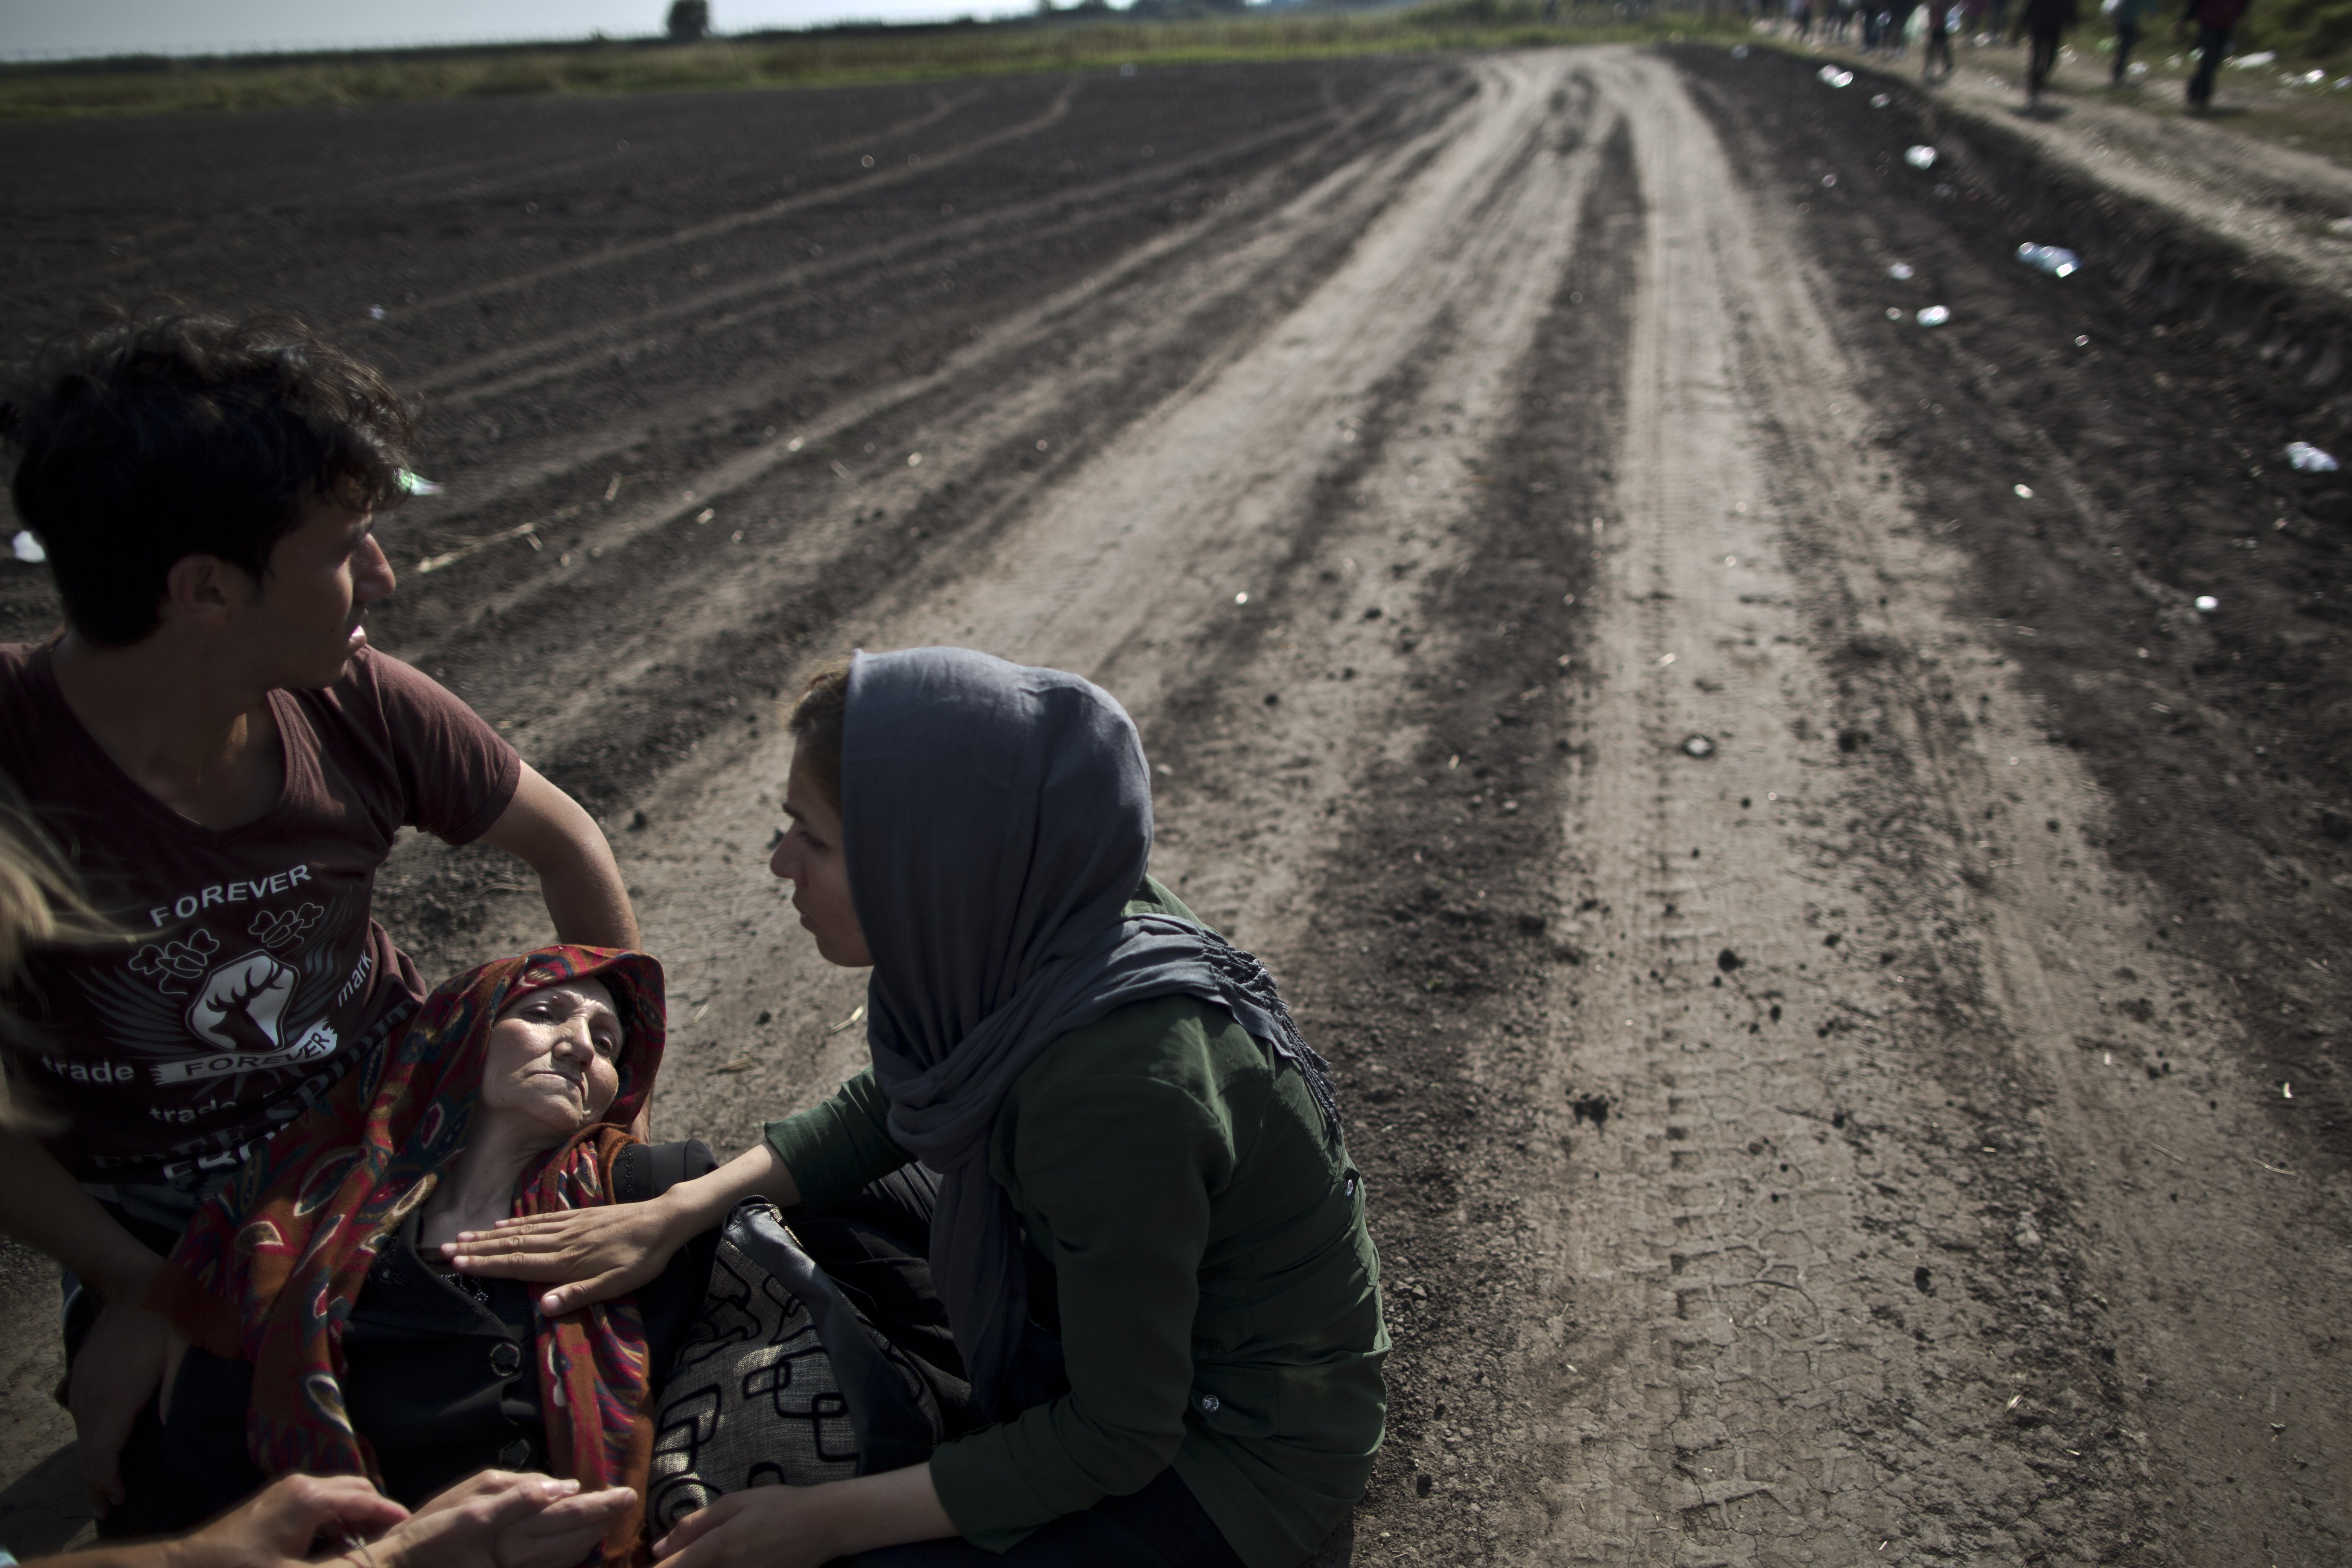 An Afghan refugee is helped by her son, daughter and a volunteering doctor after collapsing while crossing the border between Serbia and Hungary. Photo: AP